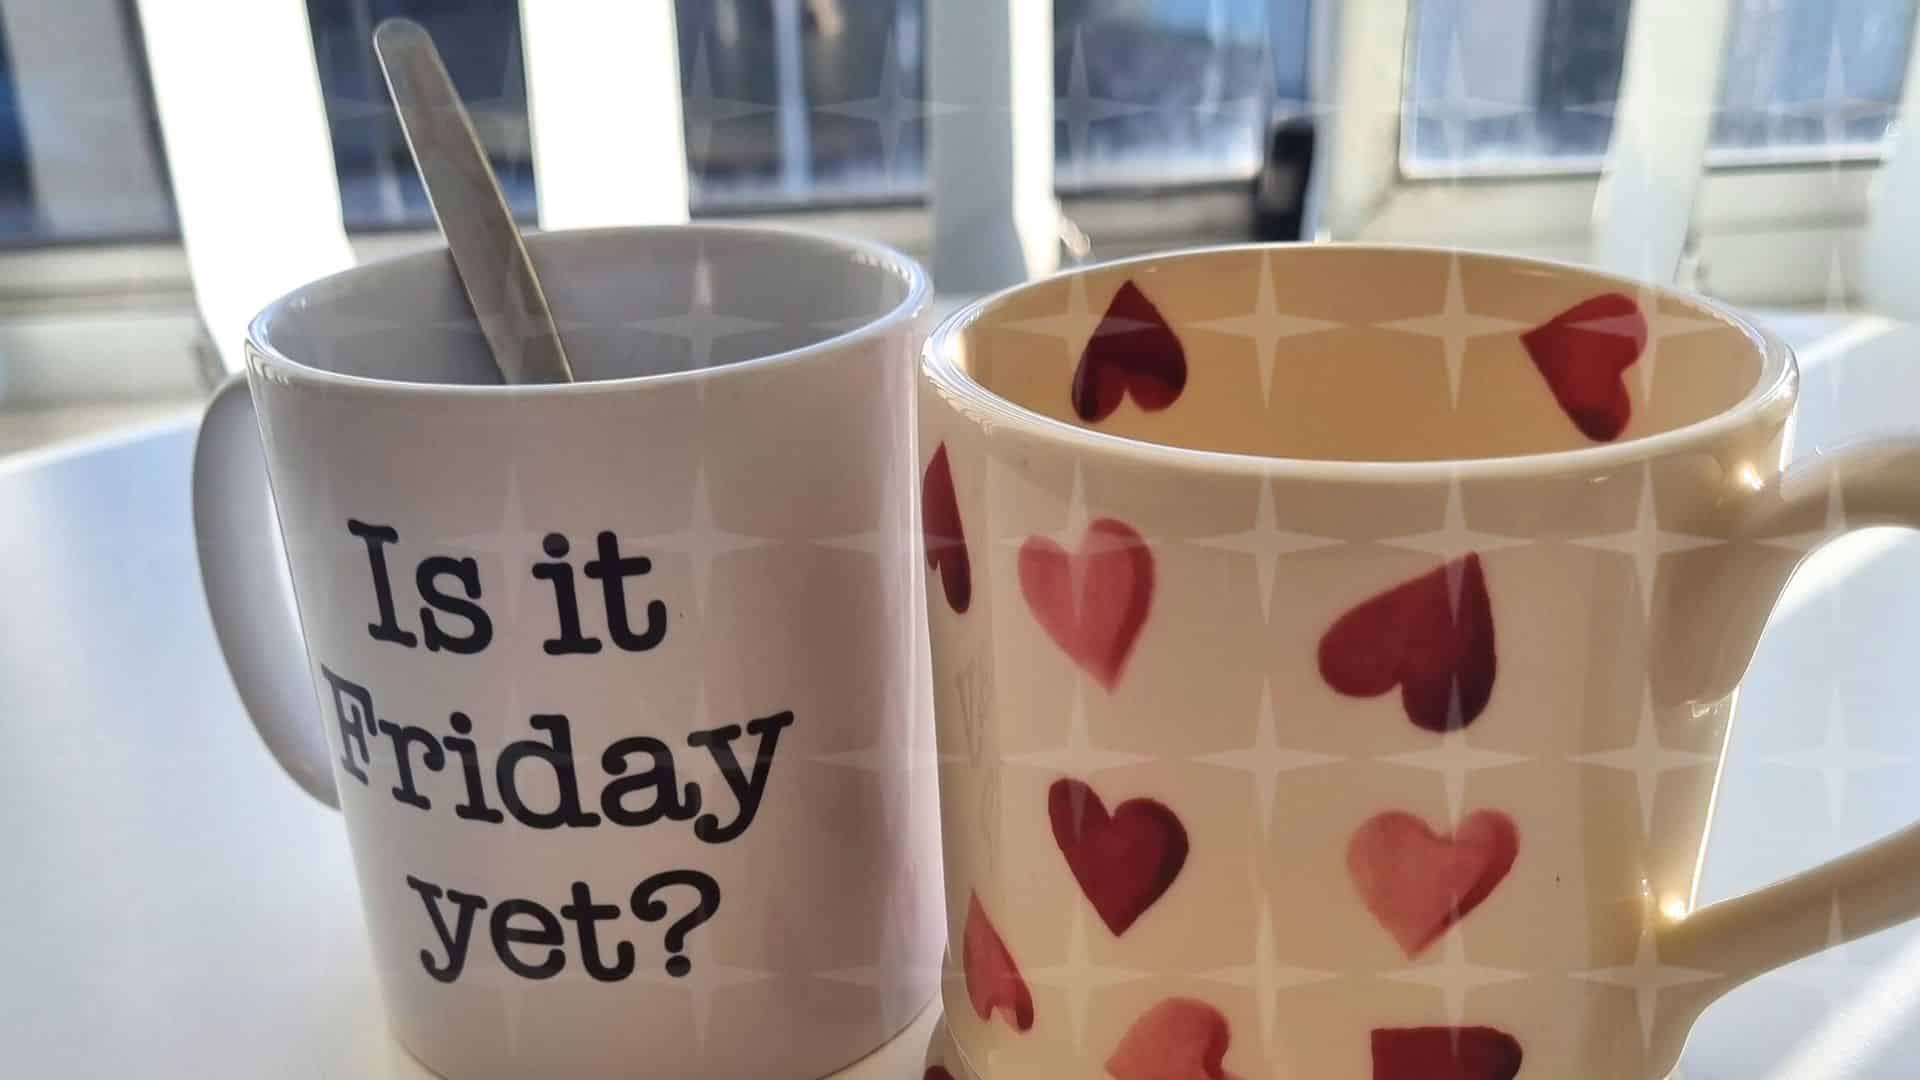 Two coffee mugs on a kitchen table side by side. One is white with red hearts.